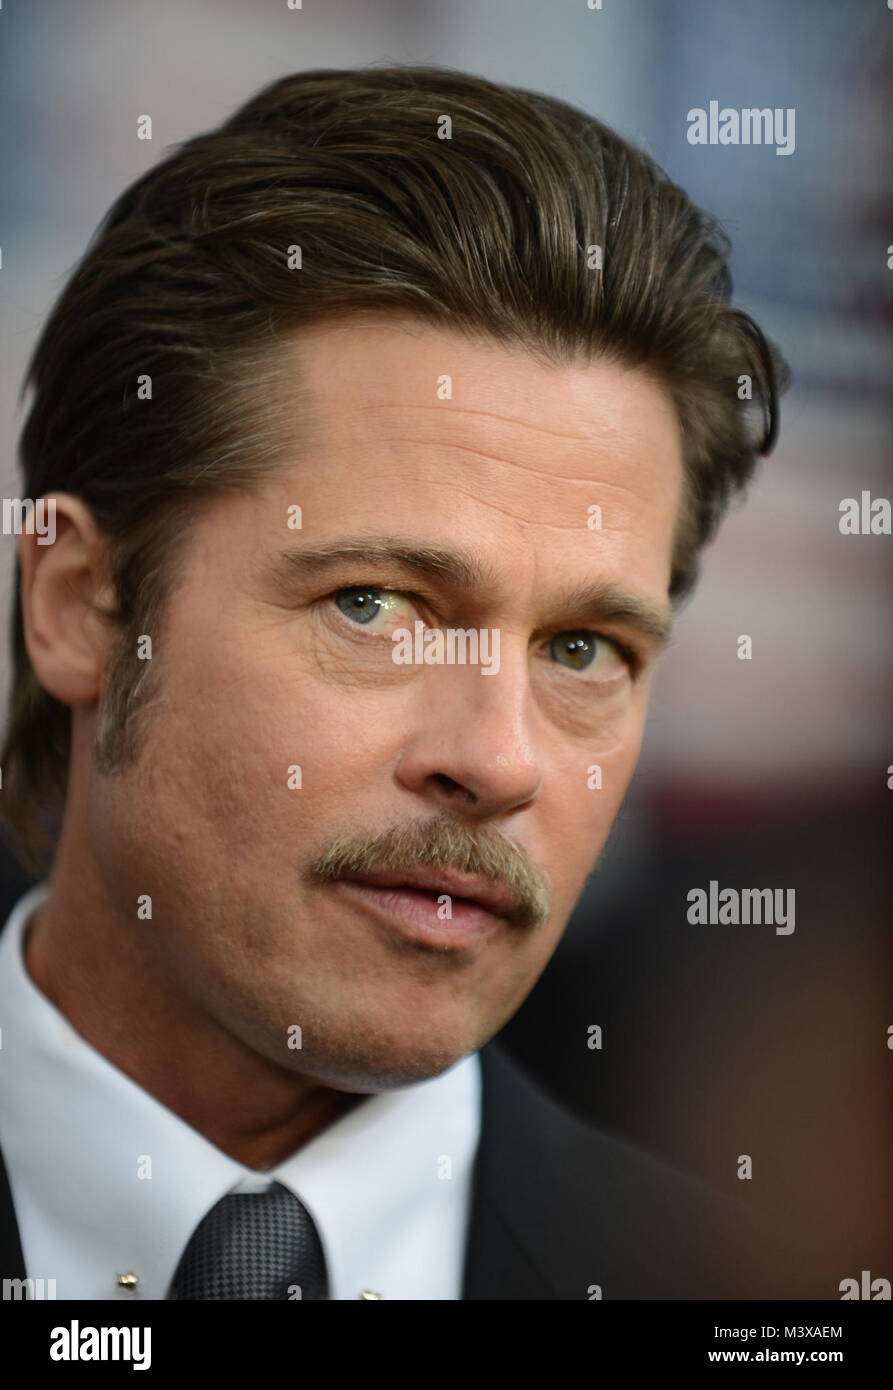 actor brad pitt, the star of the movie, who plays the part